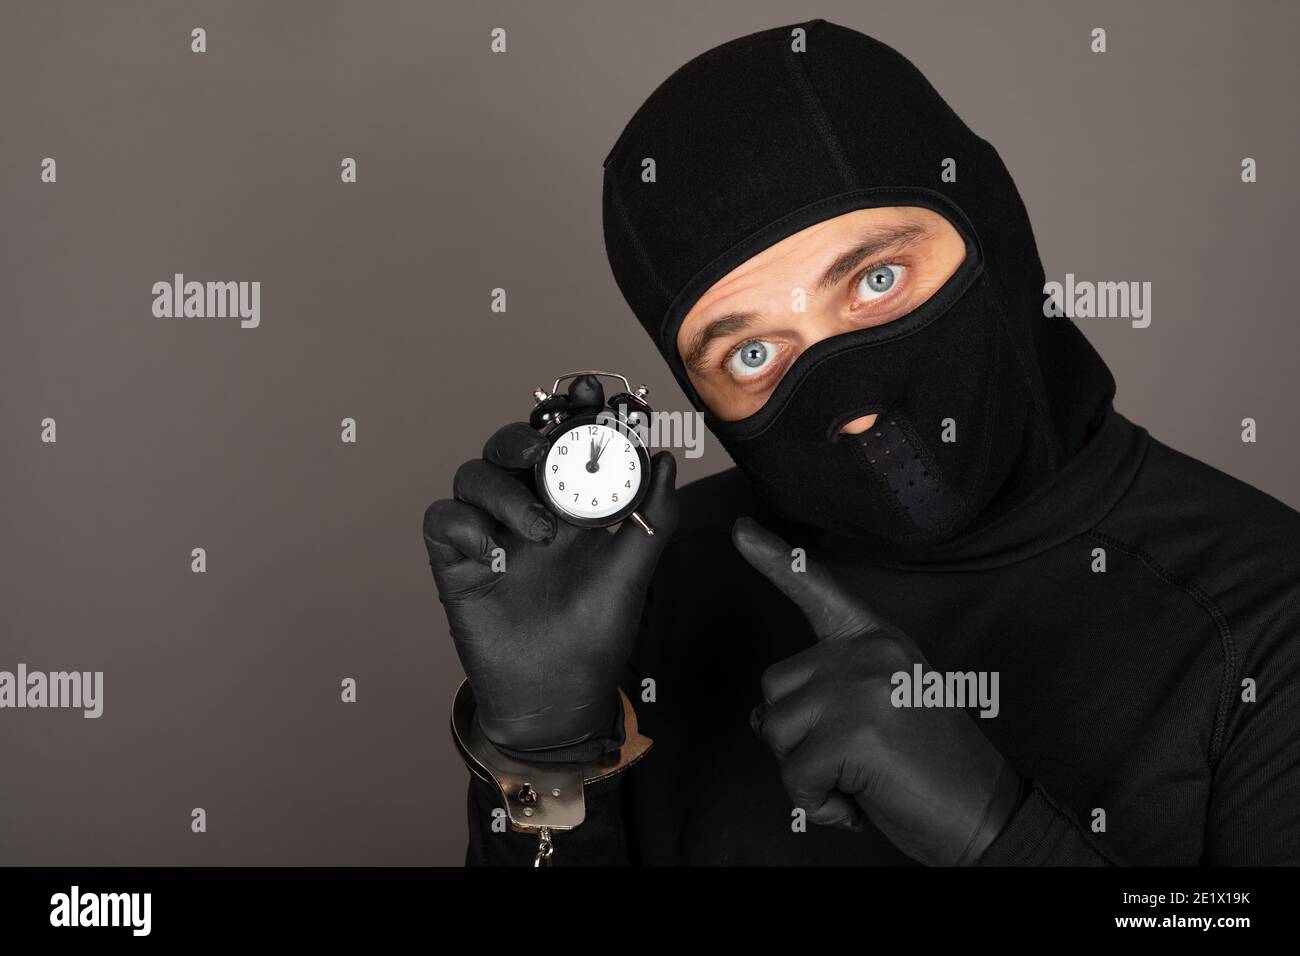 Picture of young man with black mask and outfit suspect of a robbery, wearing handcuffs in front of grey background Stock Photo